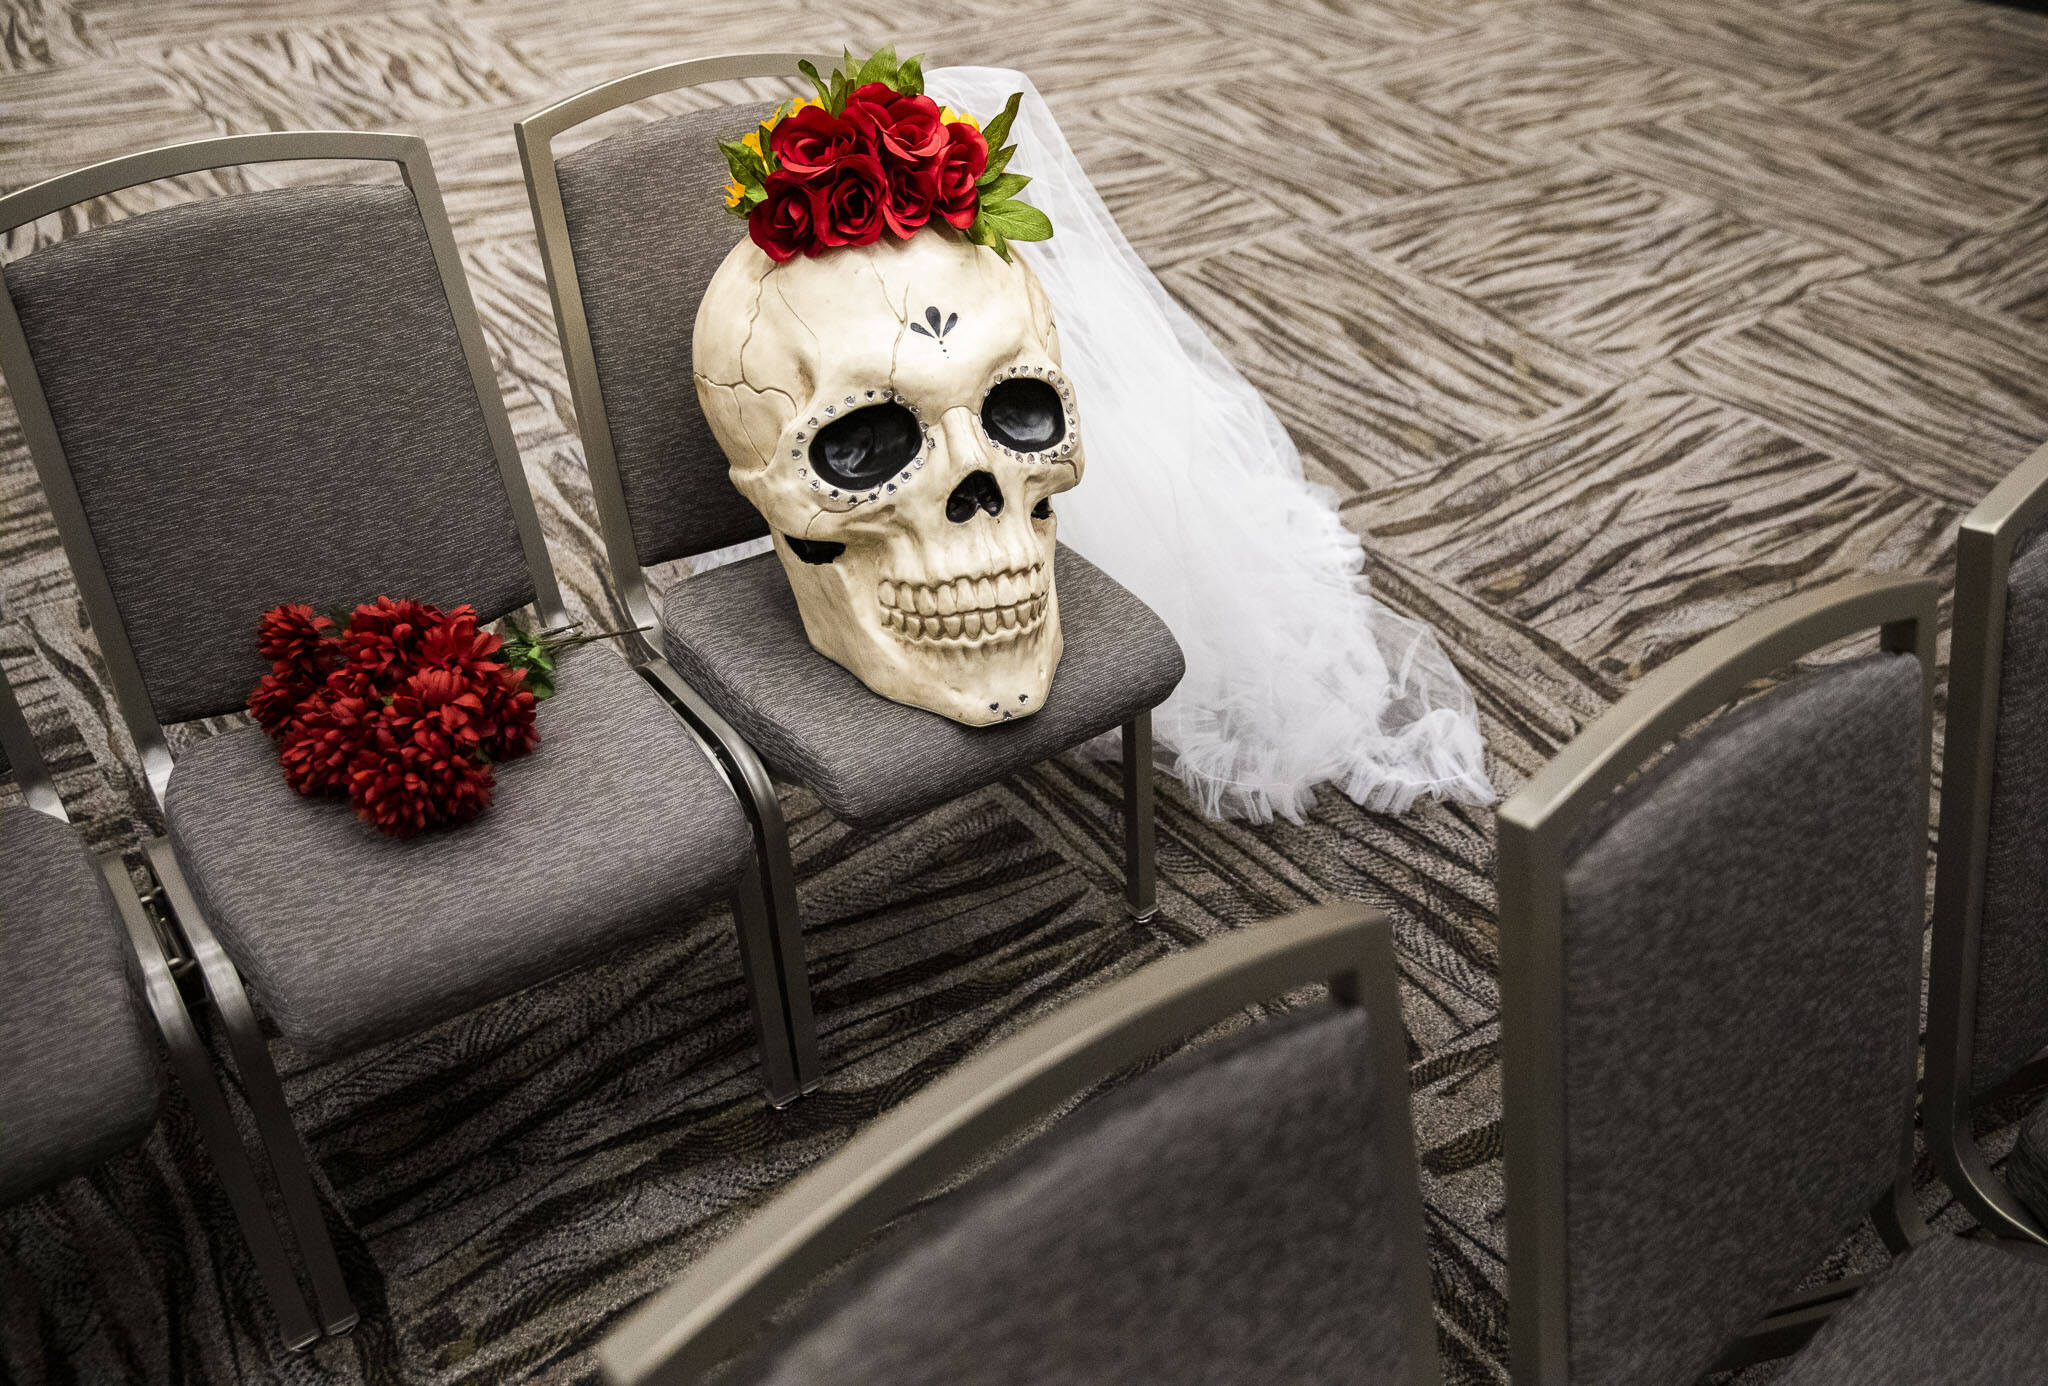 A large decorative skull with roses and a veil occupies an empty seat during the Washington-Guerrero Foundation’s Día de los Muertos event at the Lynnwood Convention Center on Saturday, in Lynnwood. (Olivia Vanni / The Herald)